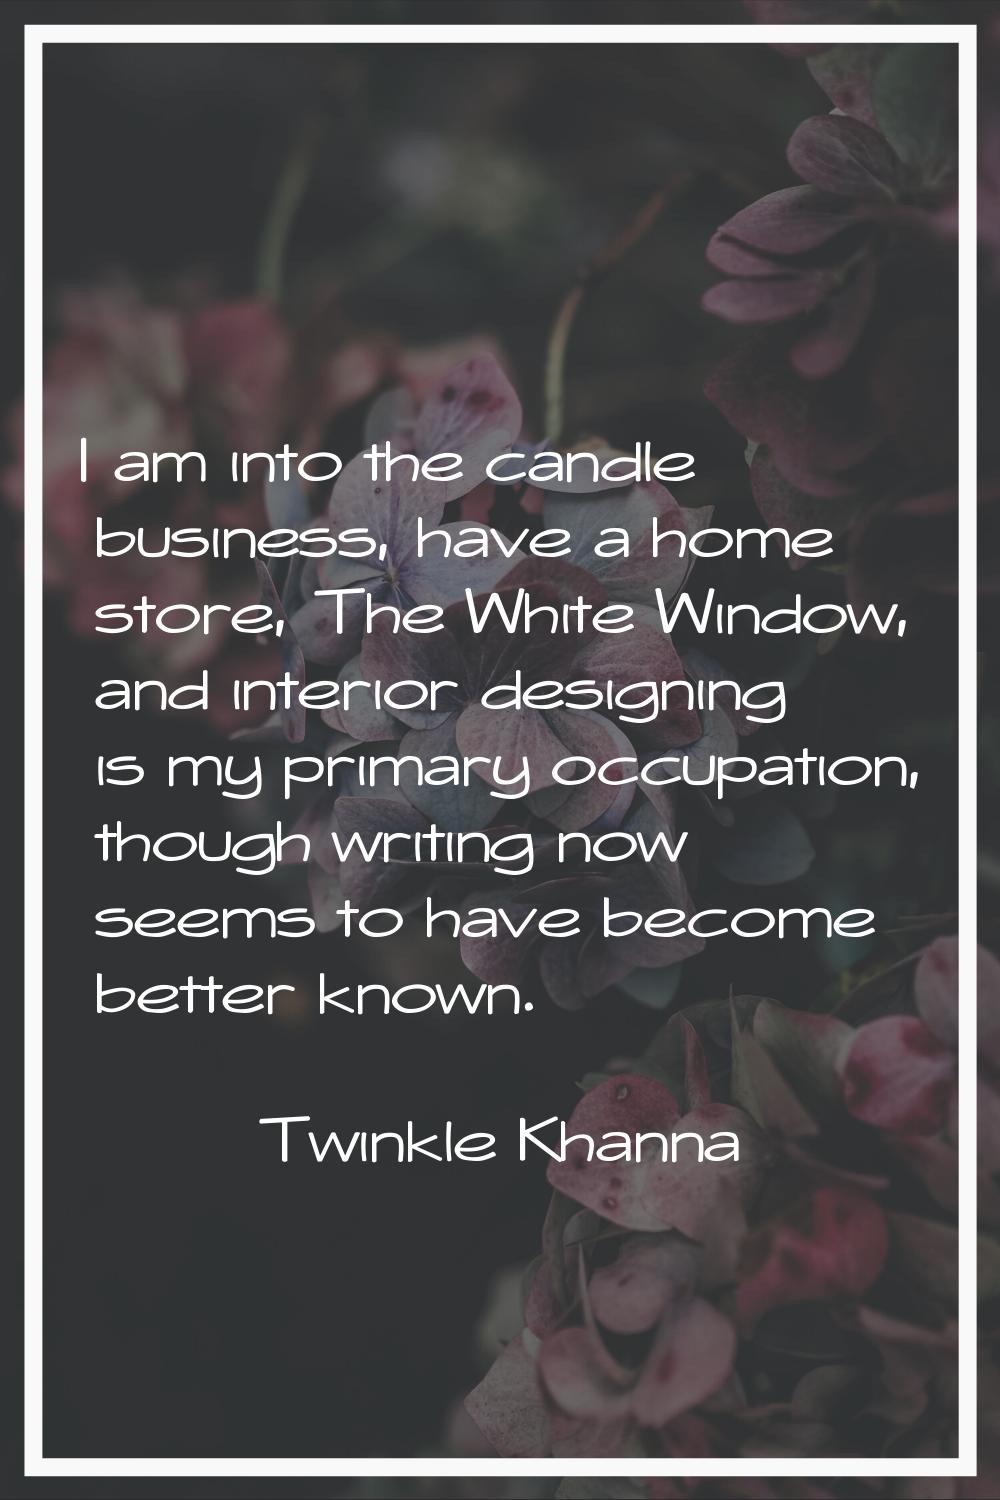 I am into the candle business, have a home store, The White Window, and interior designing is my pr